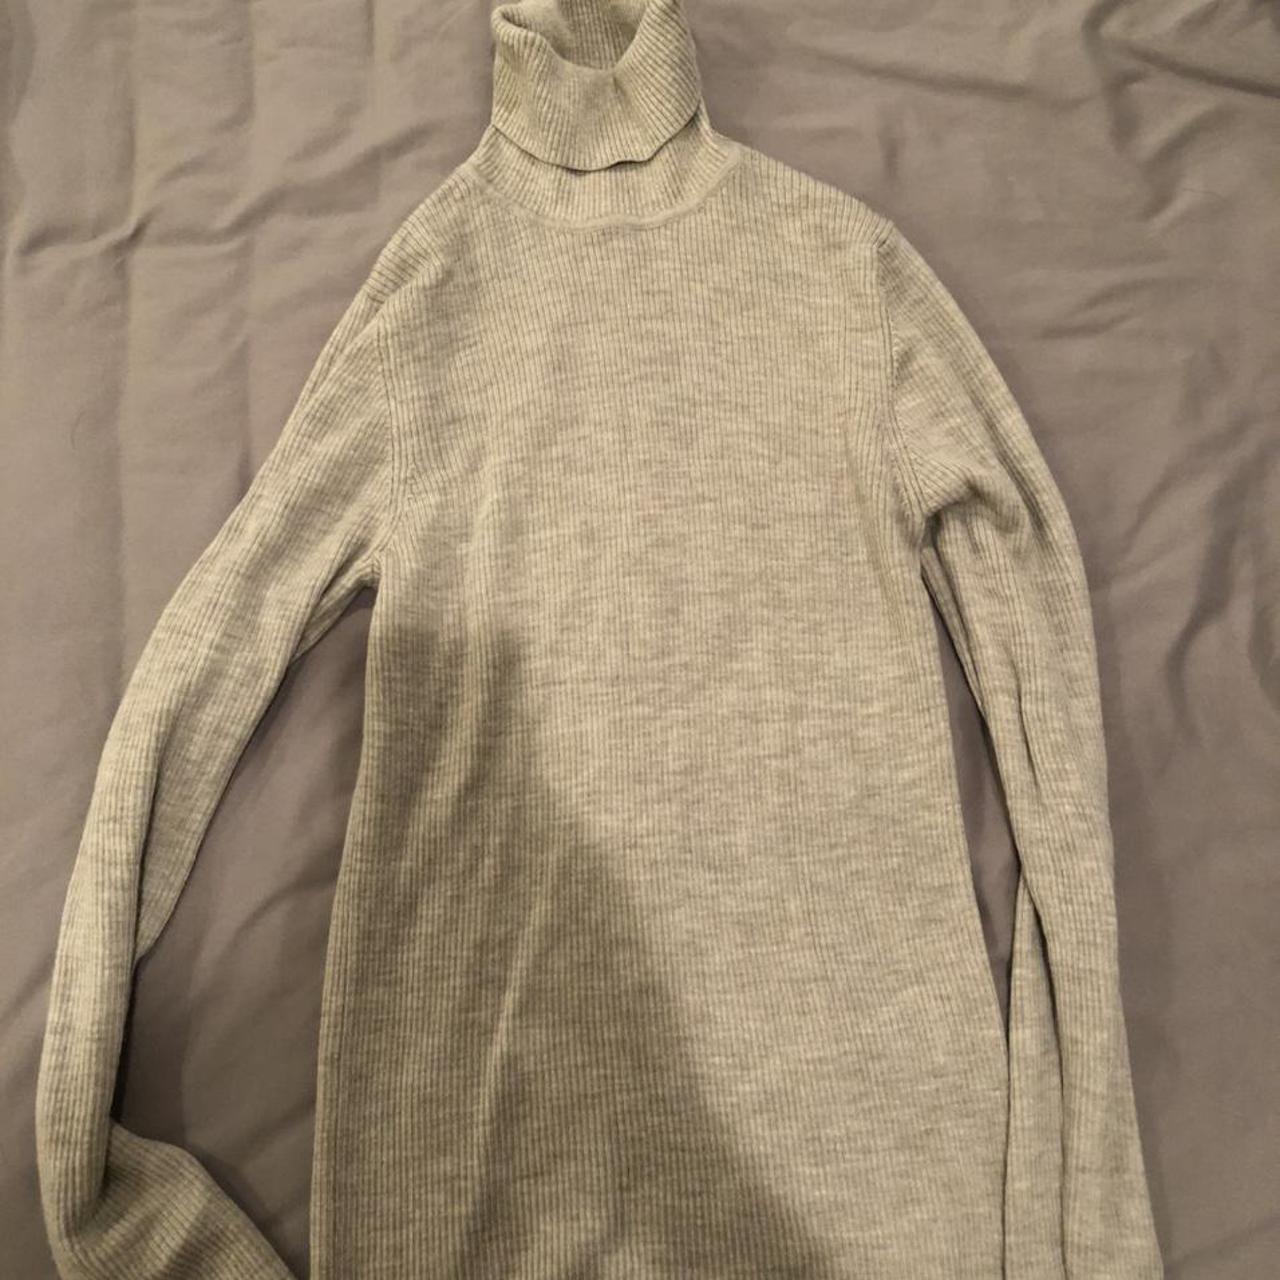 Muji turtleneck sweater. In great condition. Perfect... - Depop